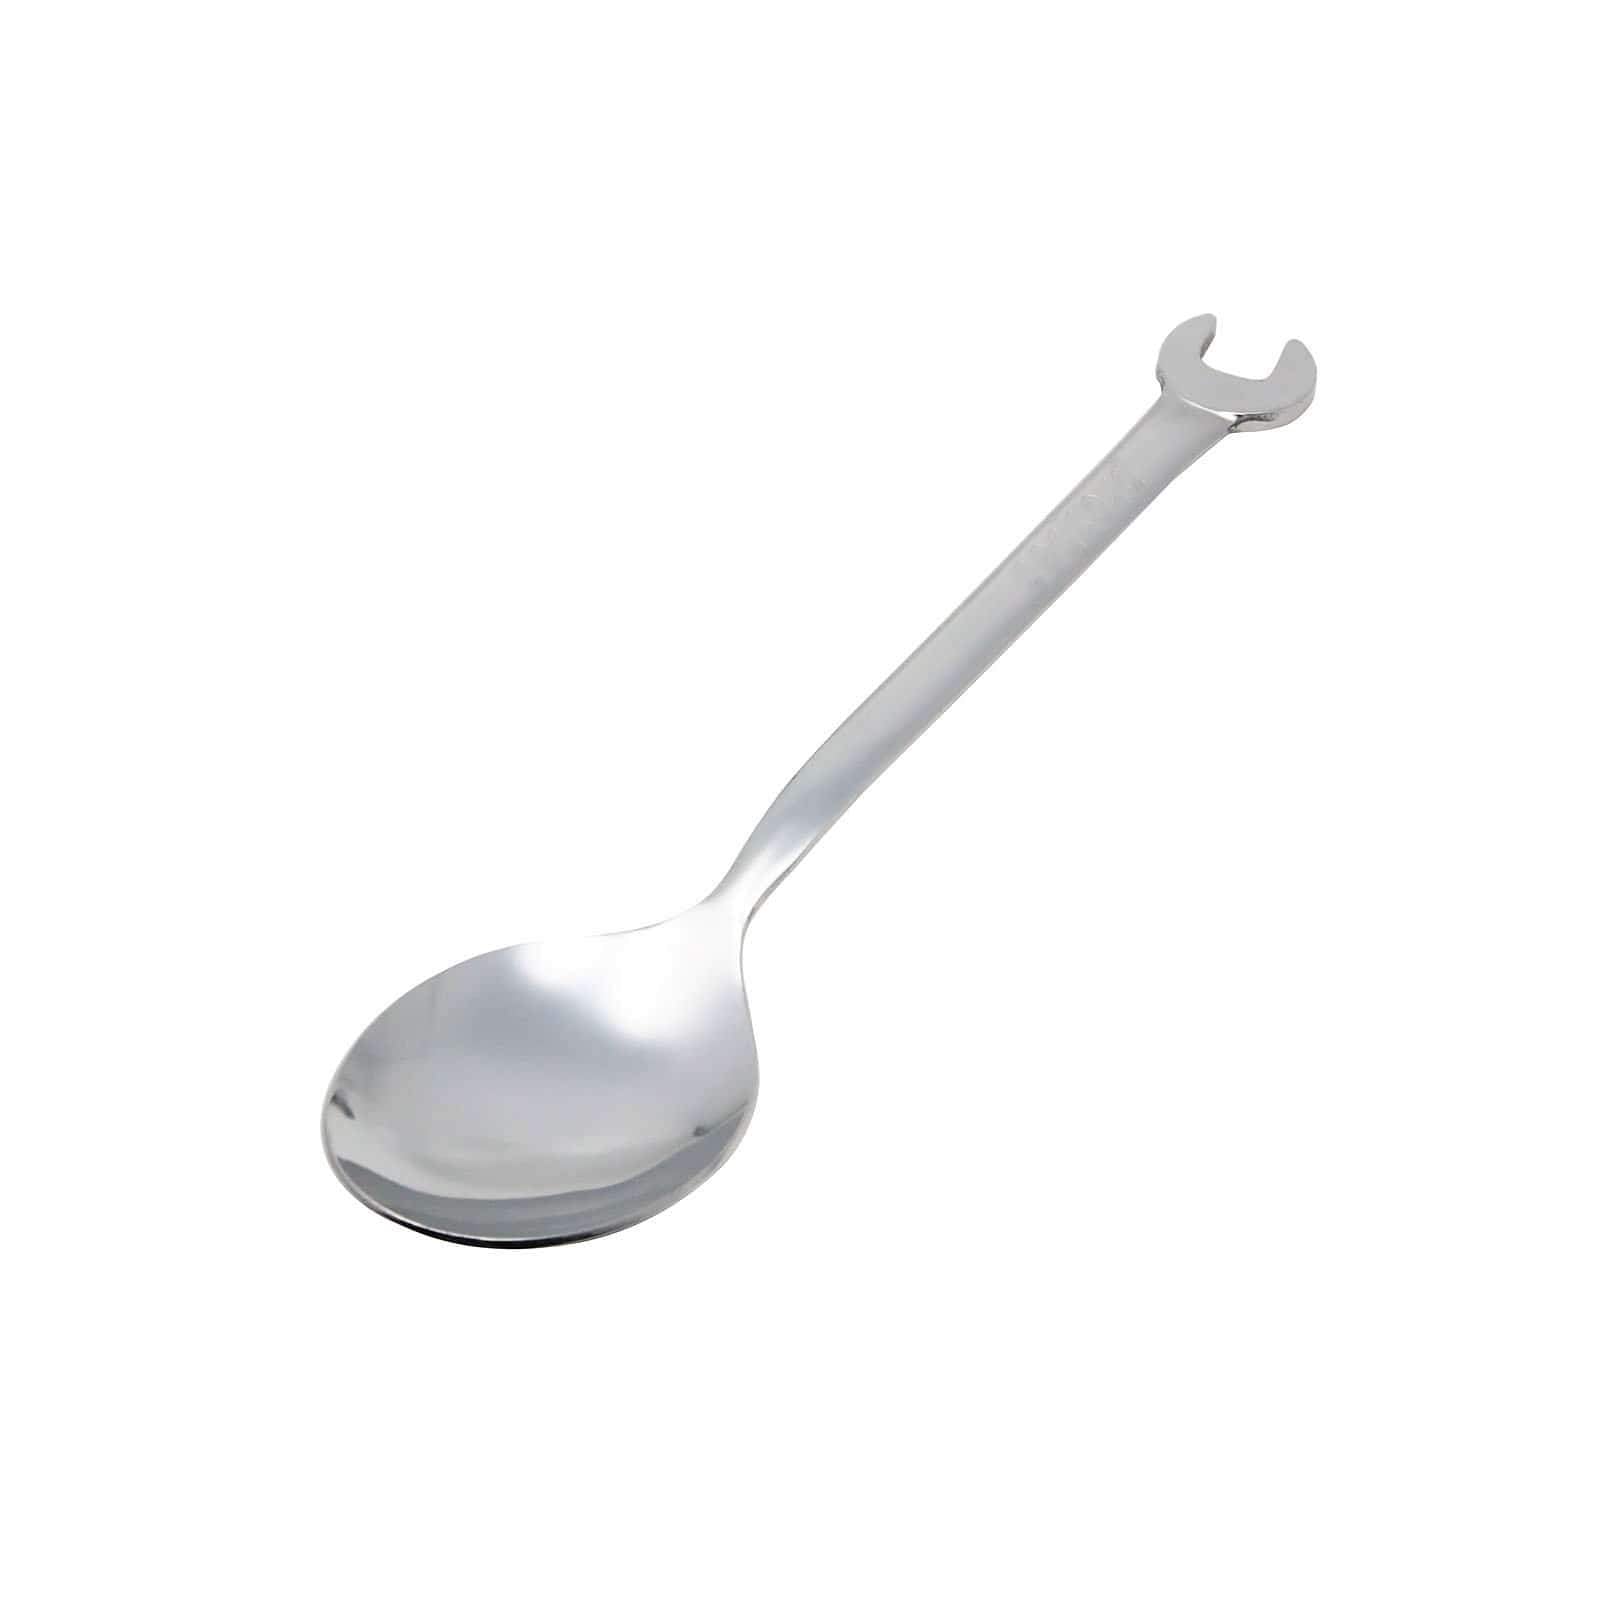 https://cdn.shopify.com/s/files/1/1610/3863/products/takeda-spanner-wrench-shaped-stainless-steel-spoon-mirror-finish-loose-cutlery-7417204179027_1600x.jpg?v=1605016573